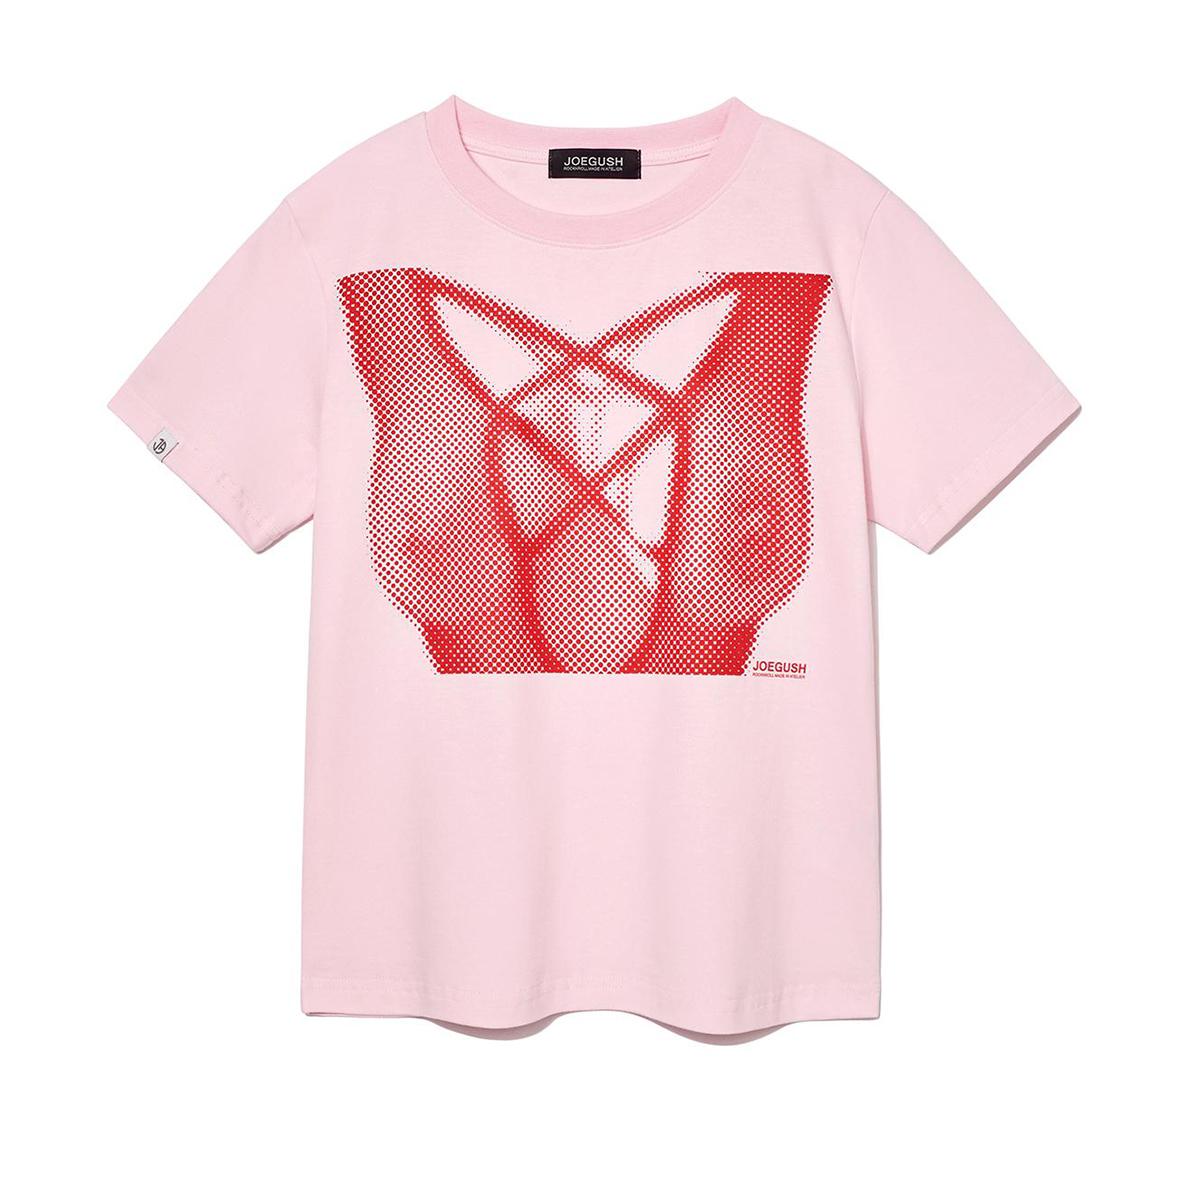 X-ray Boobs T-shirt (CROP VER.) (Baby Pink/Red)